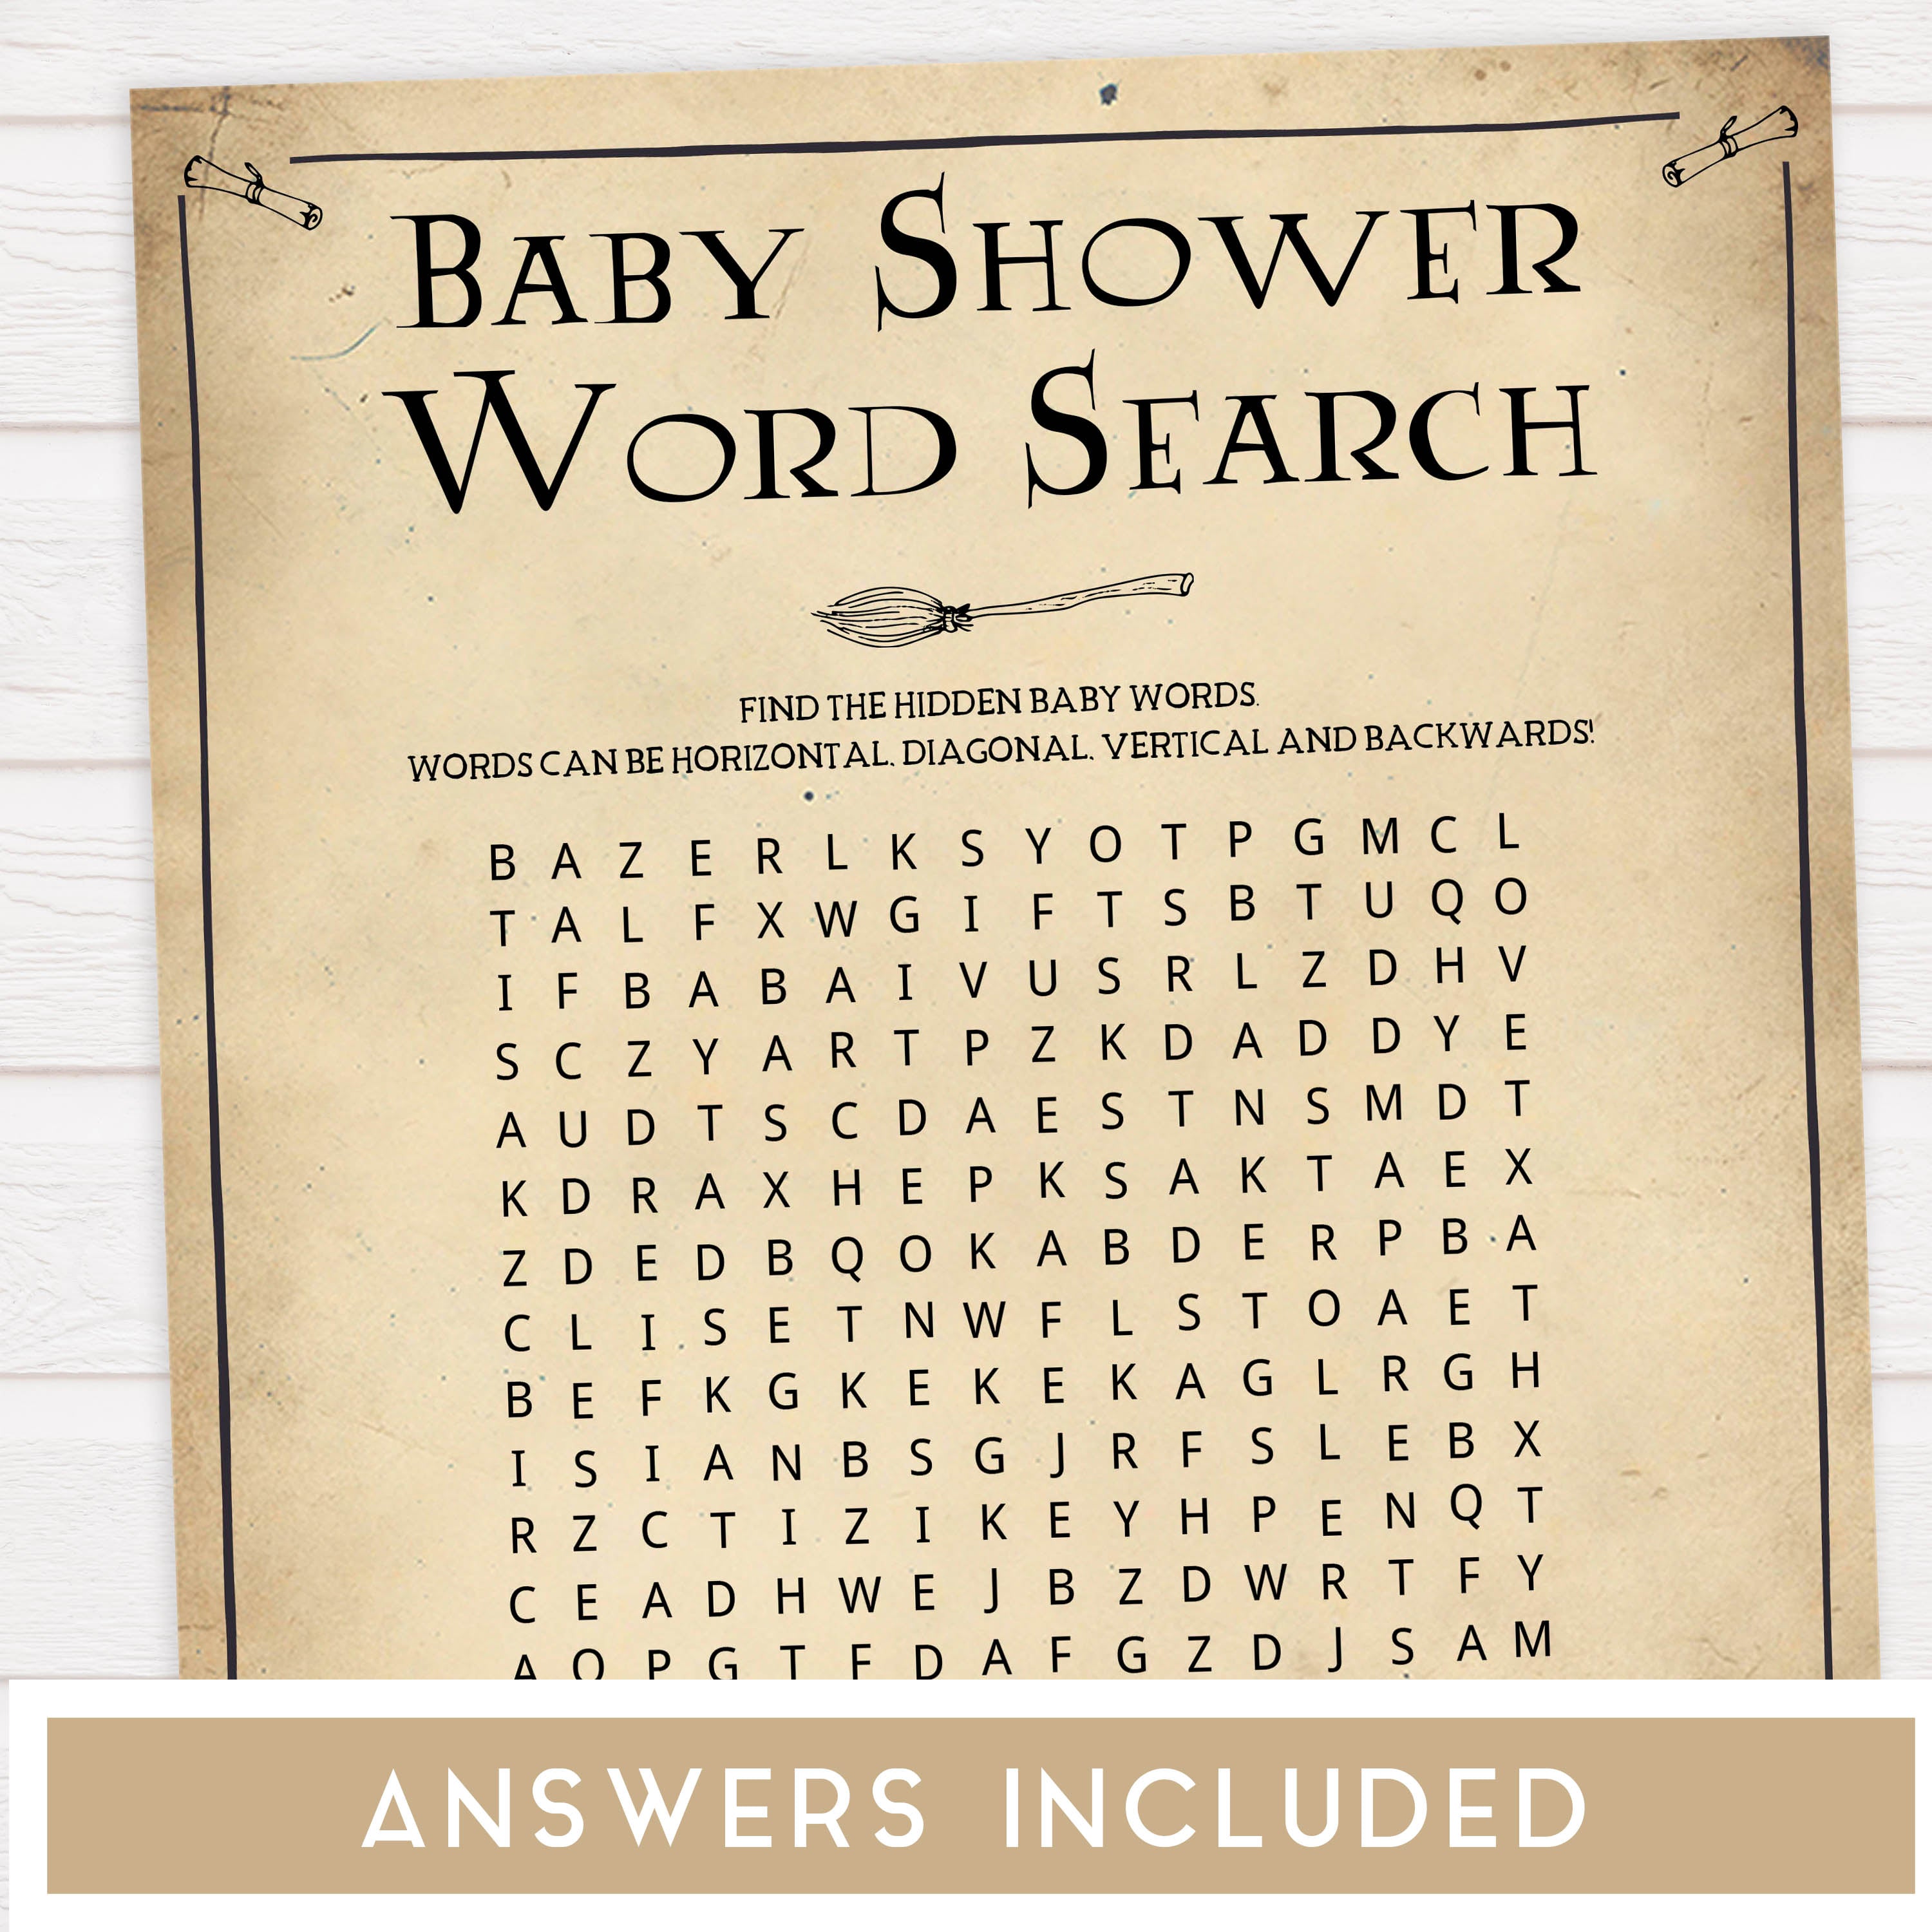 Baby Shower Word Search Game, Wizard baby shower games, printable baby shower games, Harry Potter baby games, Harry Potter baby shower, fun baby shower games,  fun baby ideas